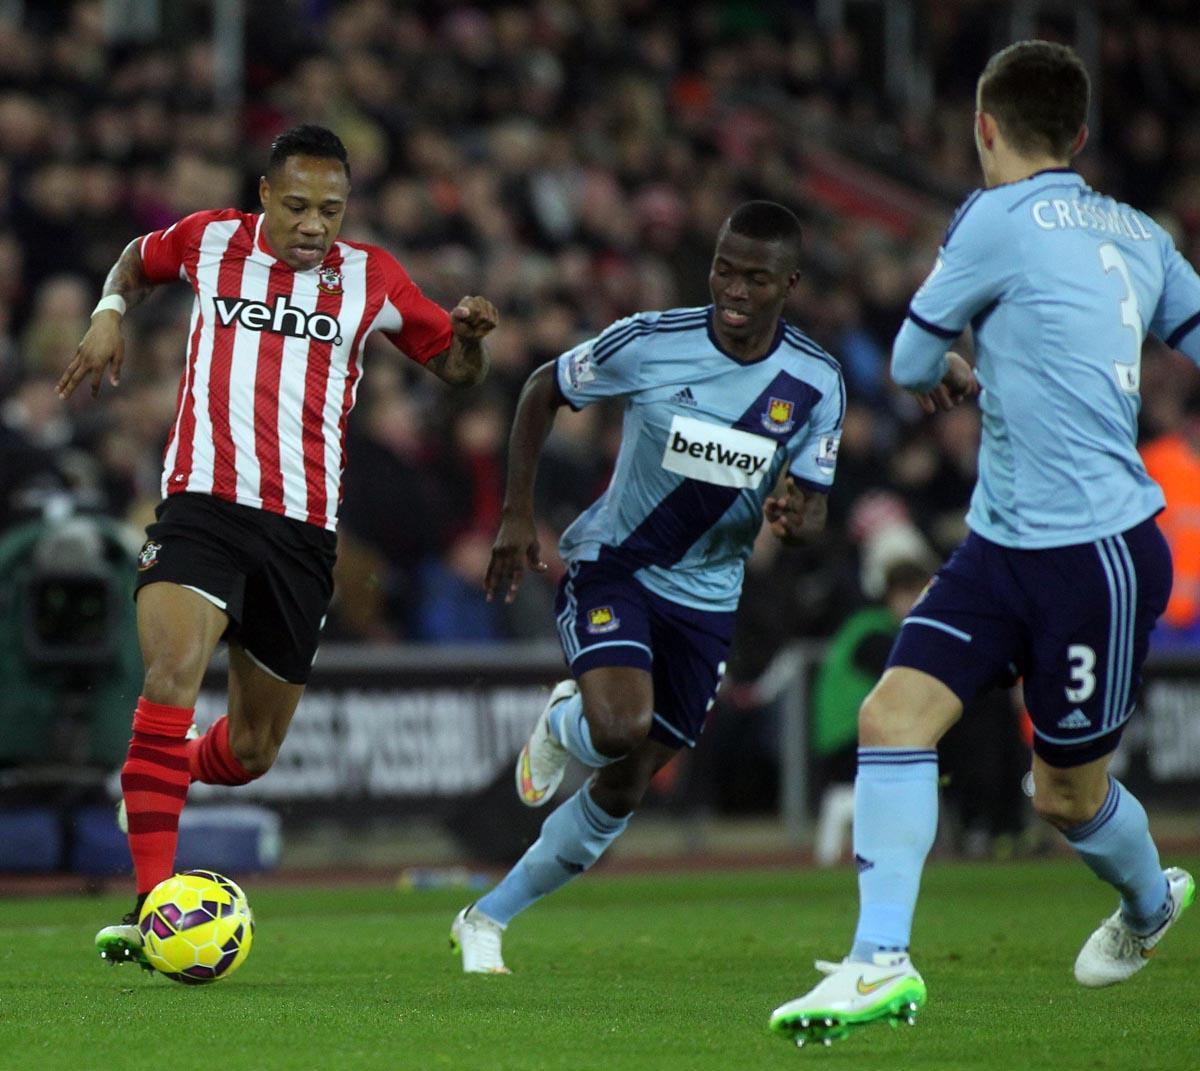 Pictures from Saints 0-0 draw against West Ham